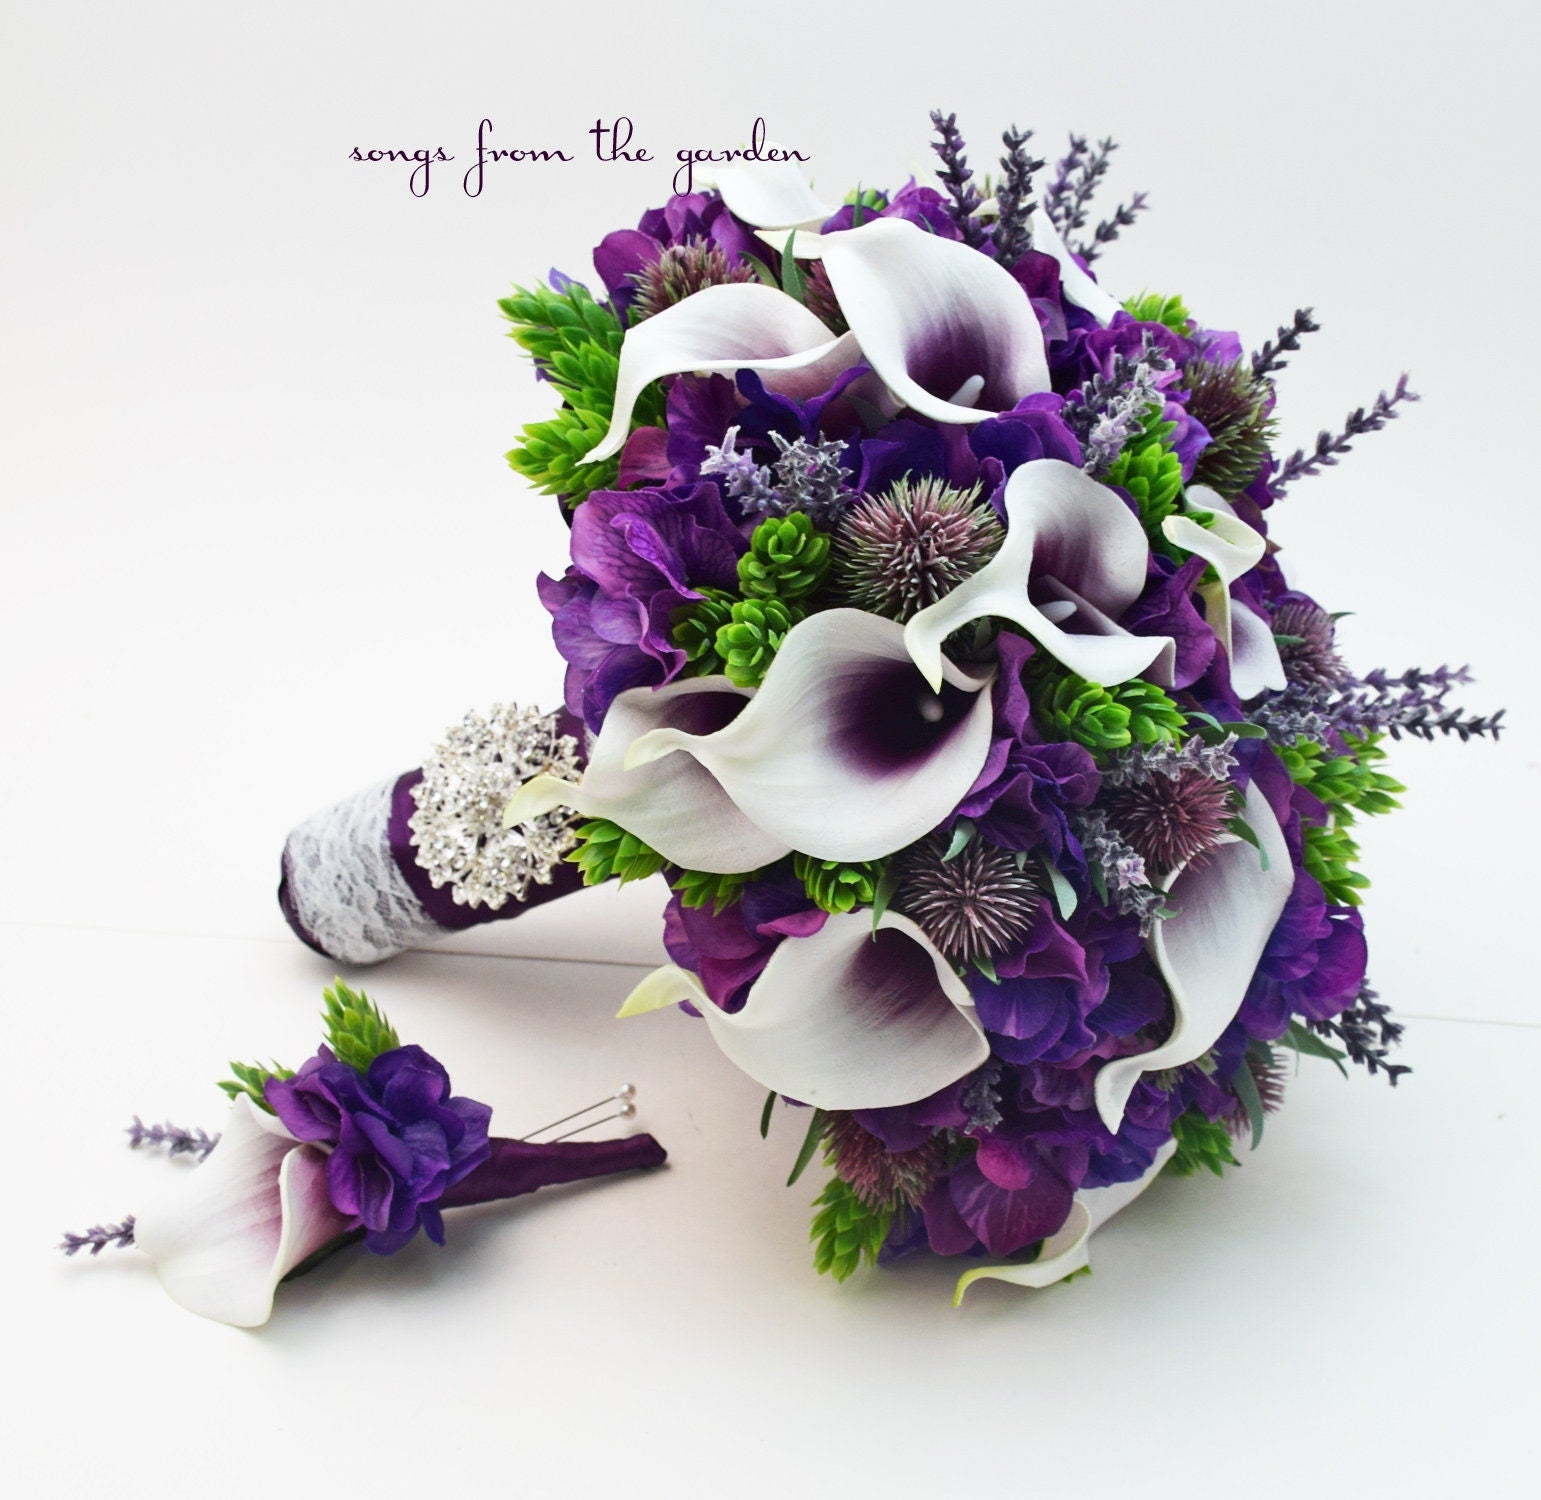 Bridal or Bridesmaid Bouquet Thistle Callas Hops - Add a Groom or Groomsman Boutonniere - Add Wedding Arch Flowers Centerpieces and More!